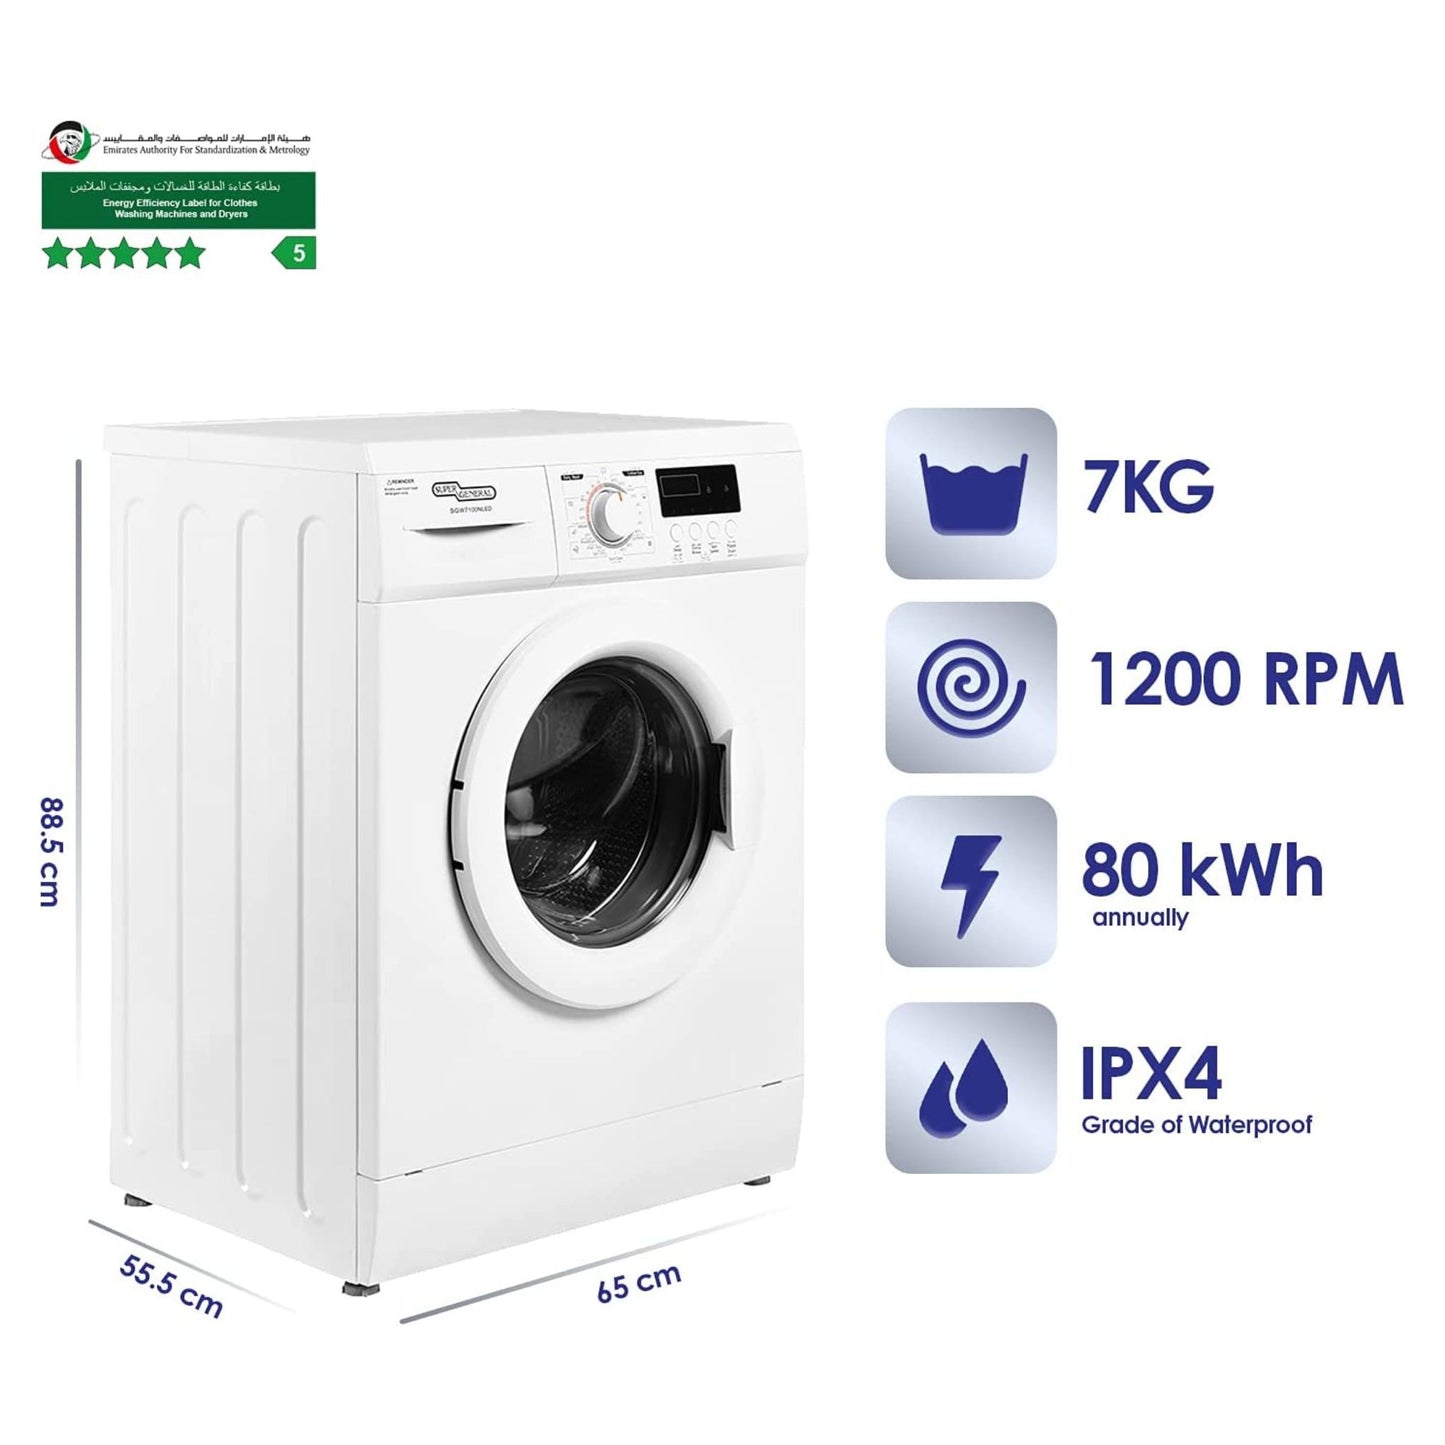 Super General Washer 12KG and 8KG Dryer, SGW 12600CRCMB